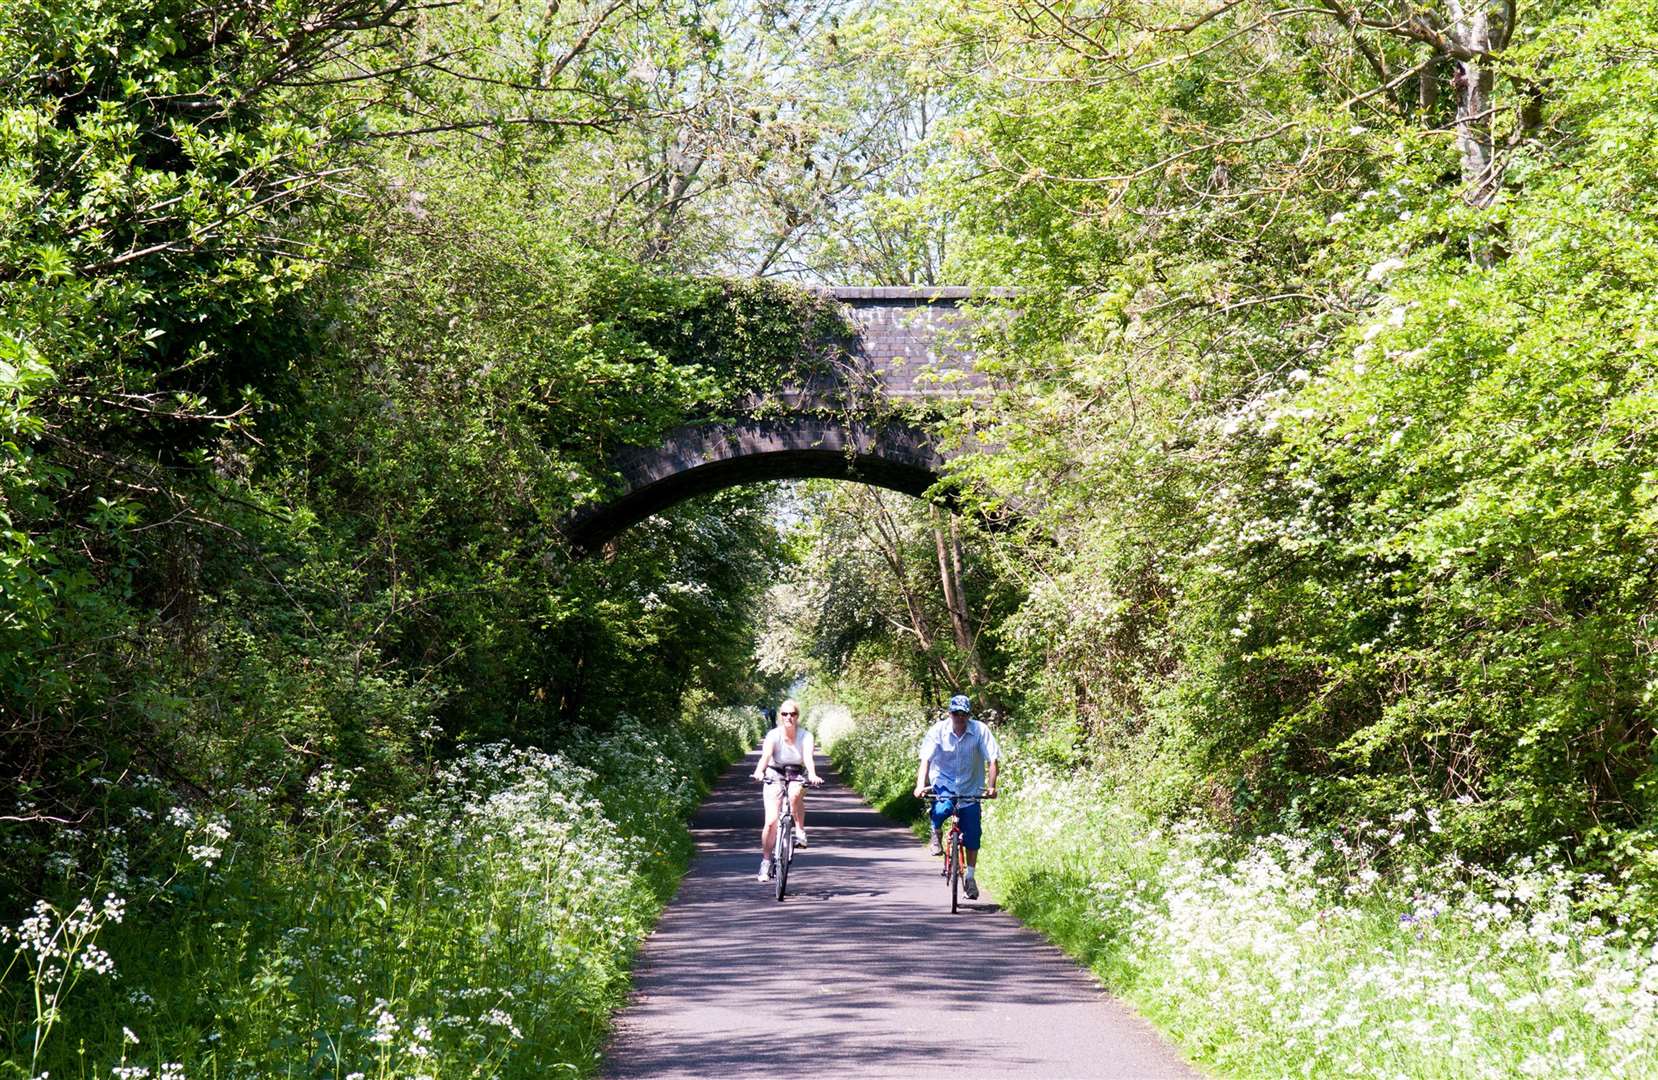 Enjoy a bike ride around the highways and byways of the county